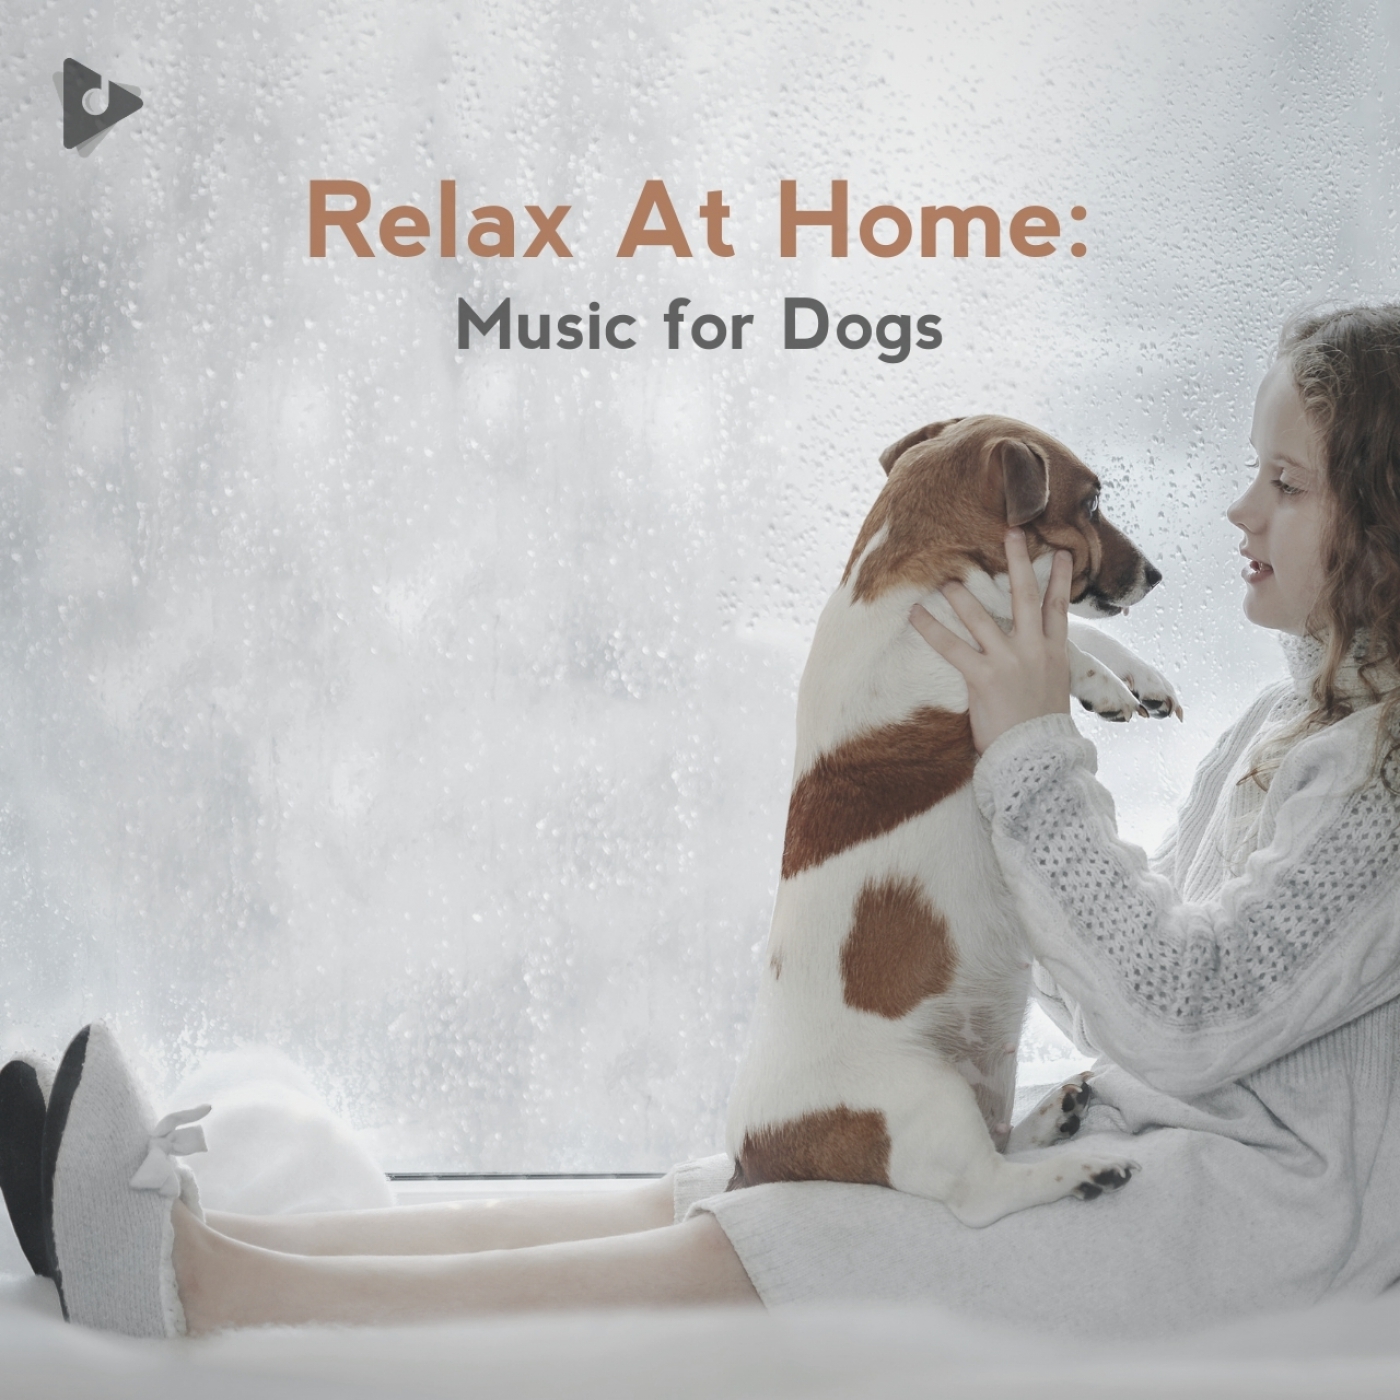 Relax At Home: Music for Dogs